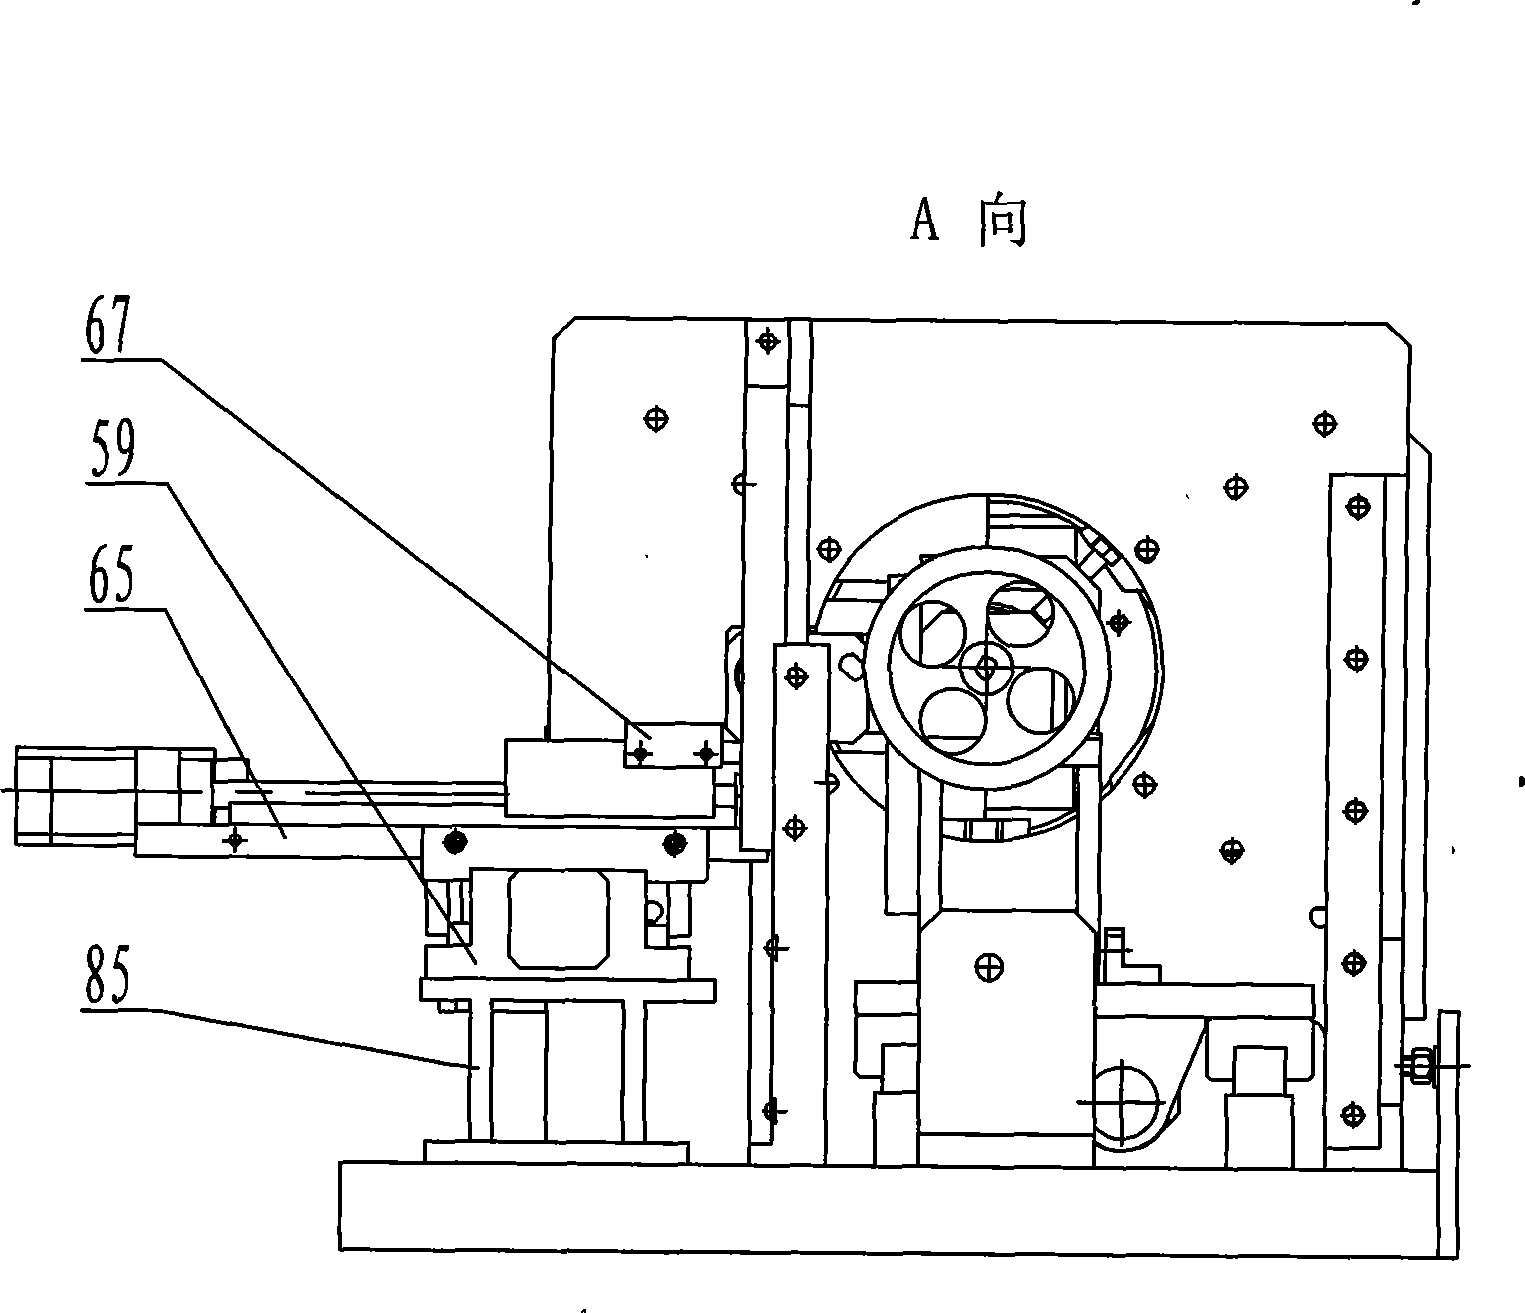 Core rotor assembly dimension measuring device for turbo-charger